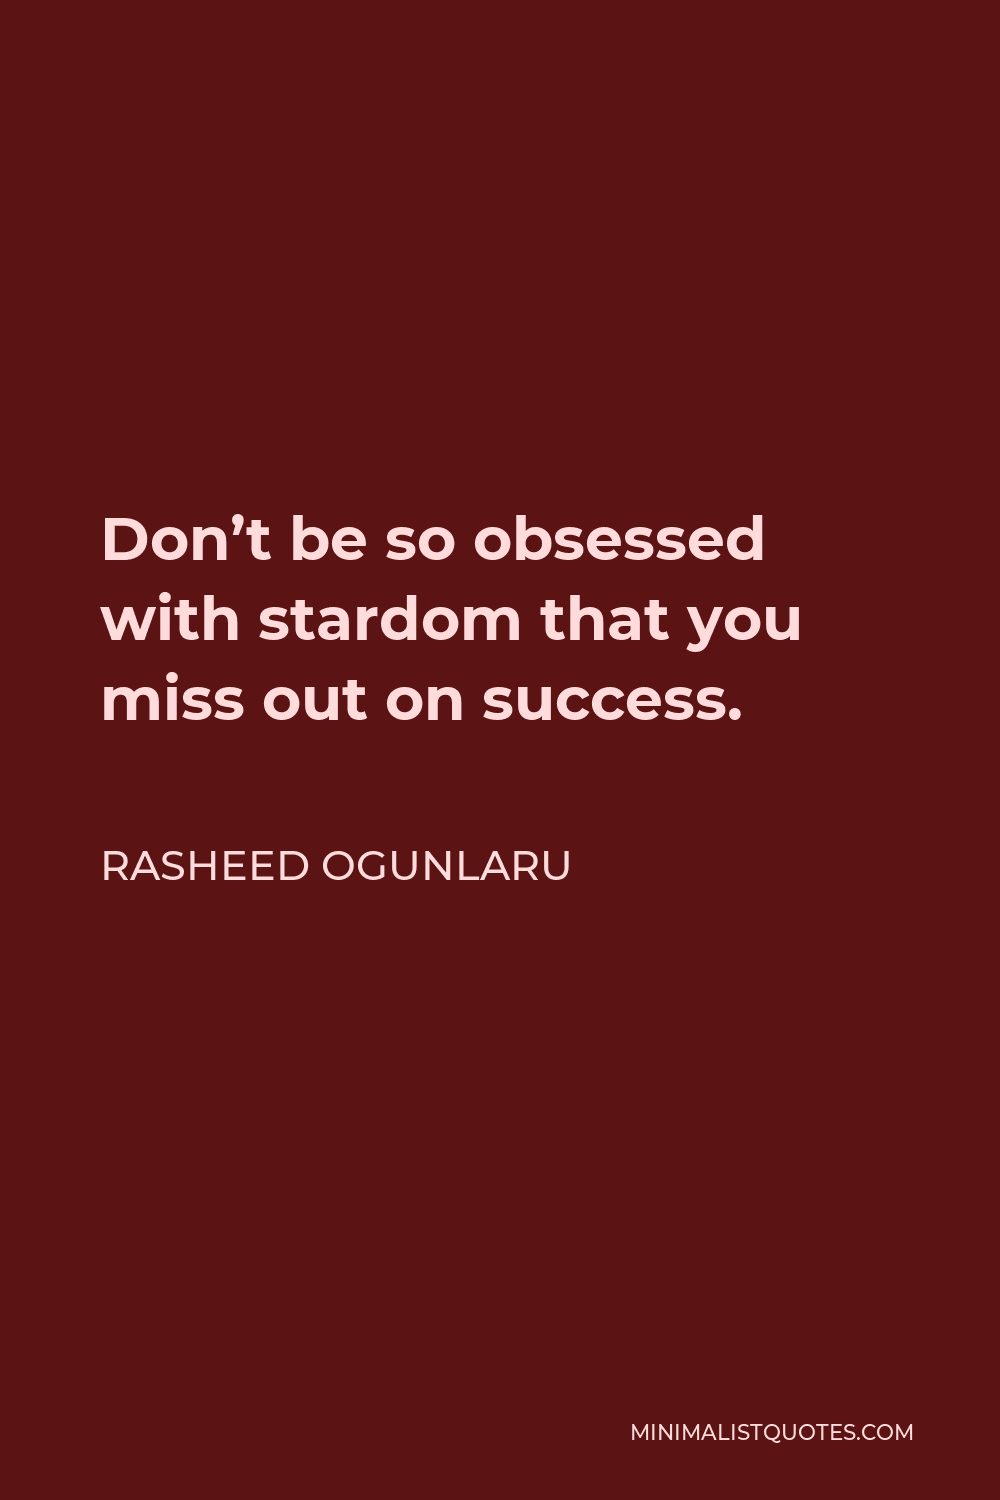 Rasheed Ogunlaru Quote - Don’t be so obsessed with stardom that you miss out on success.